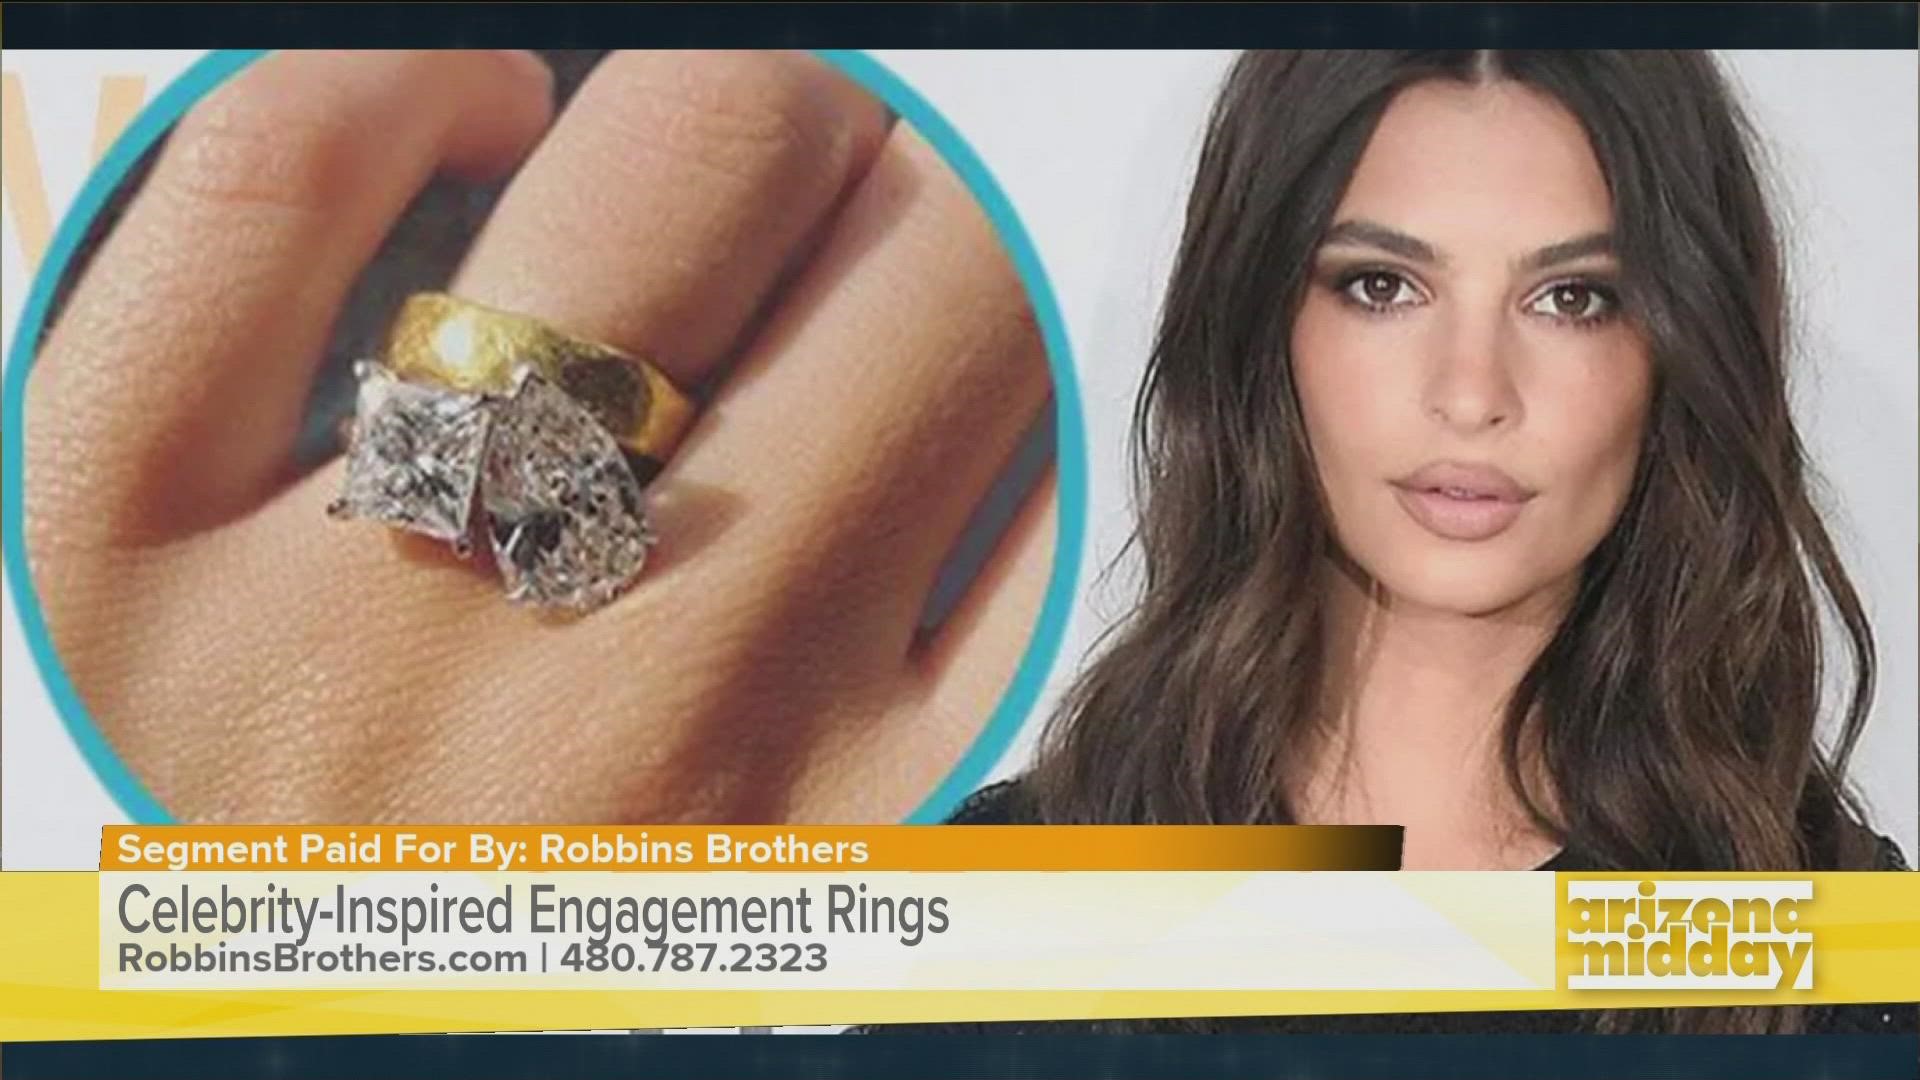 Music and movie stars are setting trends for the diamond industry, and Robbins Brothers shares how you can get a celebrity-inspired ring, but with your own touch!